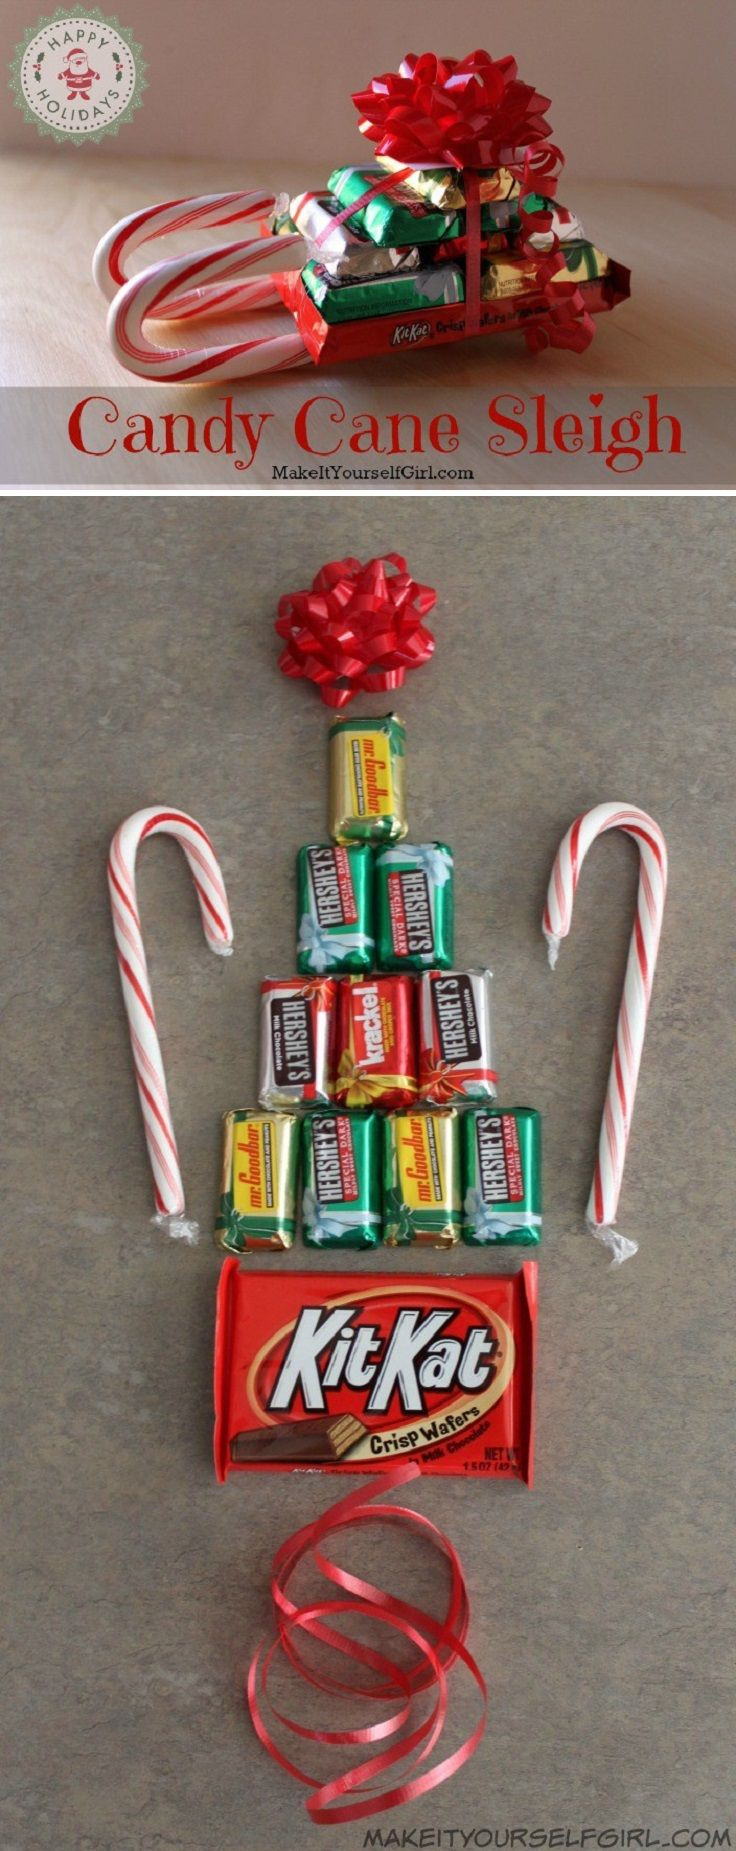 Christmas Candy Gifts
 Simple DIY Candy Cane Sleigh 12 Wondrous DIY Candy Cane